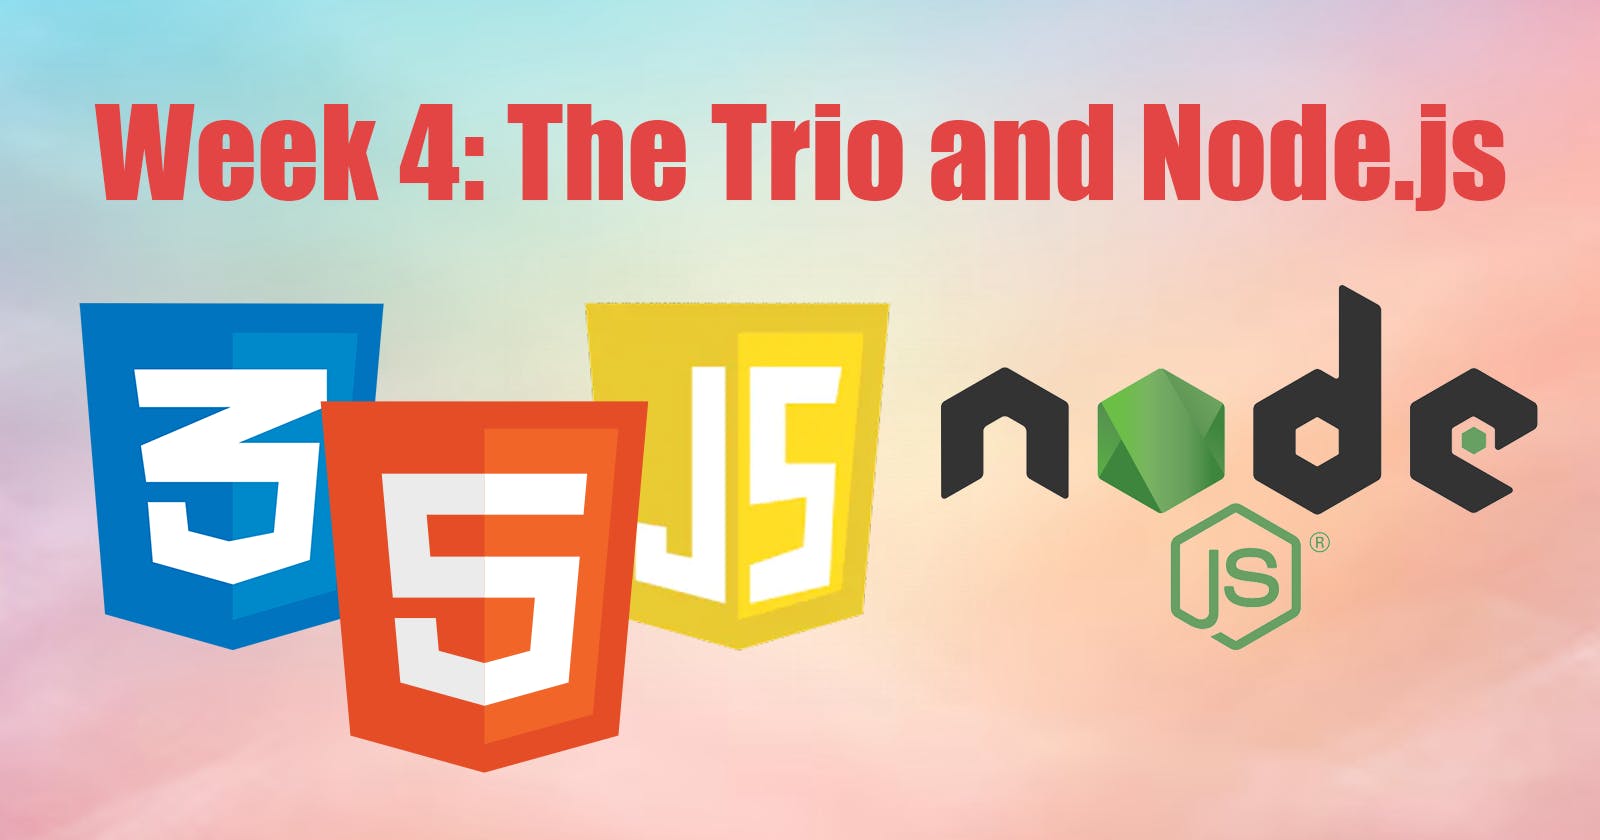 Journey to Fullstack - Week 4: The Trio and Node.js